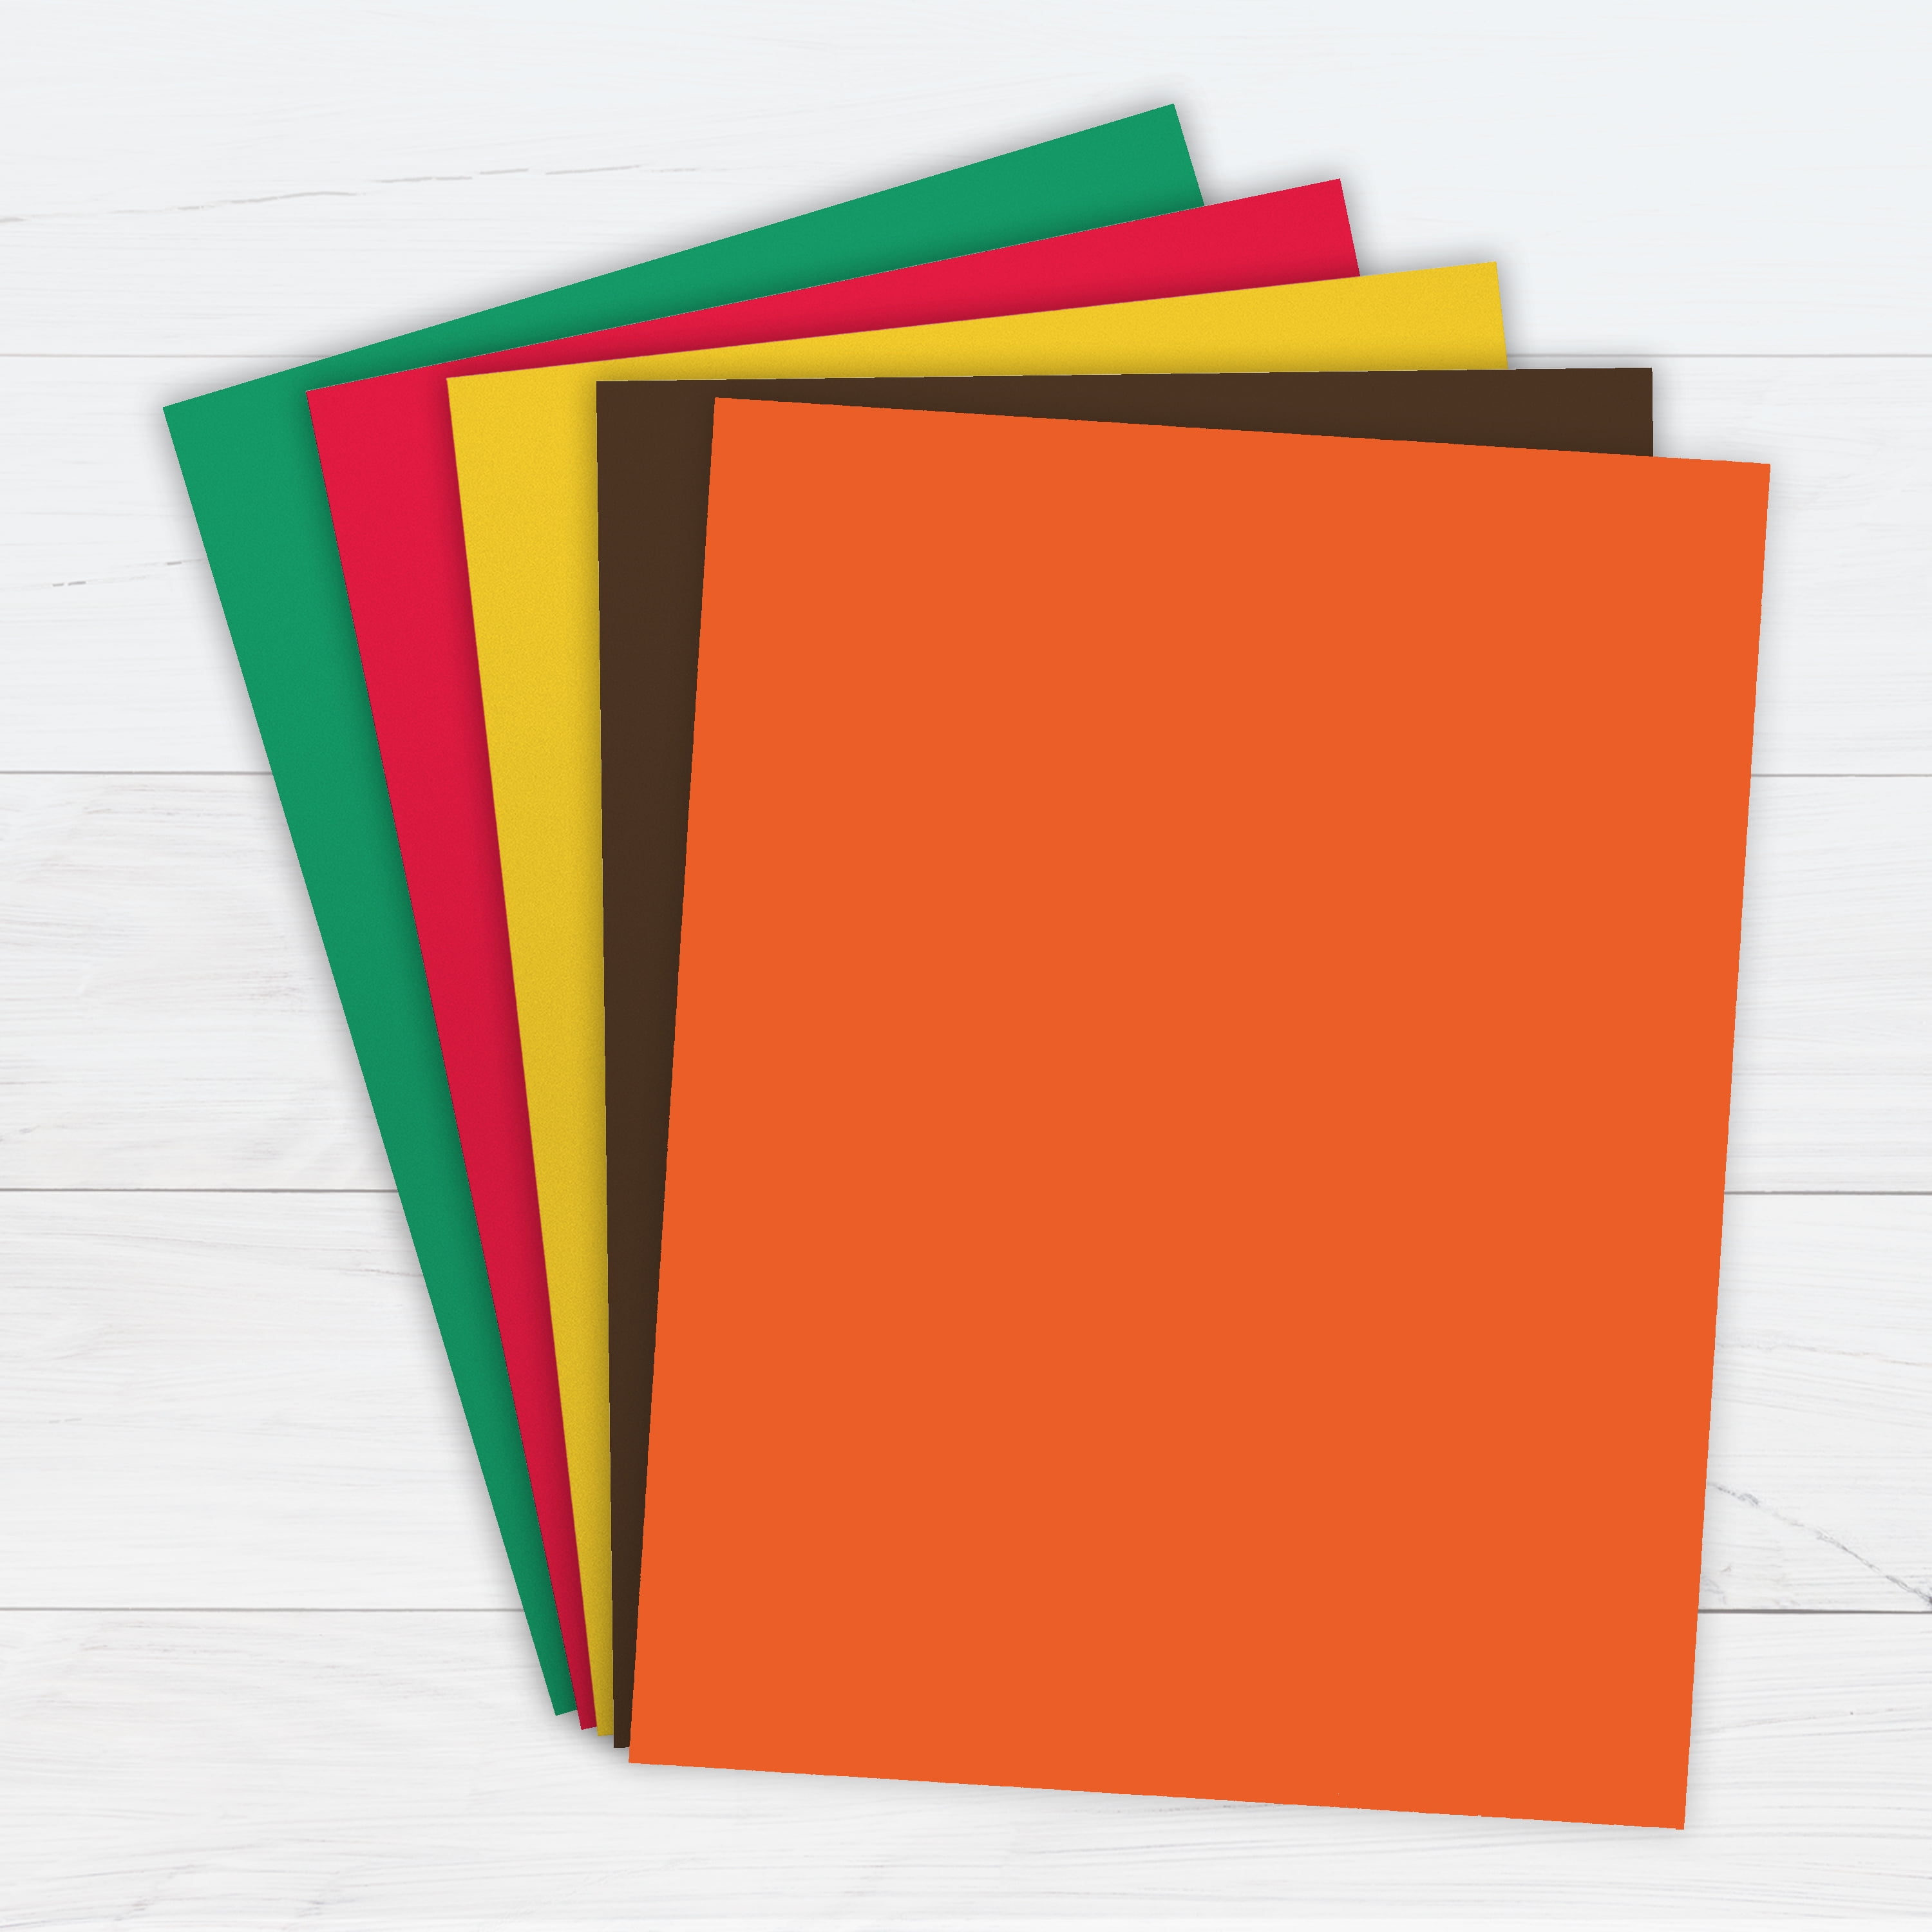 PrintWorks Holiday Cardstock, 3 Assorted Colors, Solid Core, 200 Sheets, 8.5”  x 11” (00592), 200 Sheets - Kroger